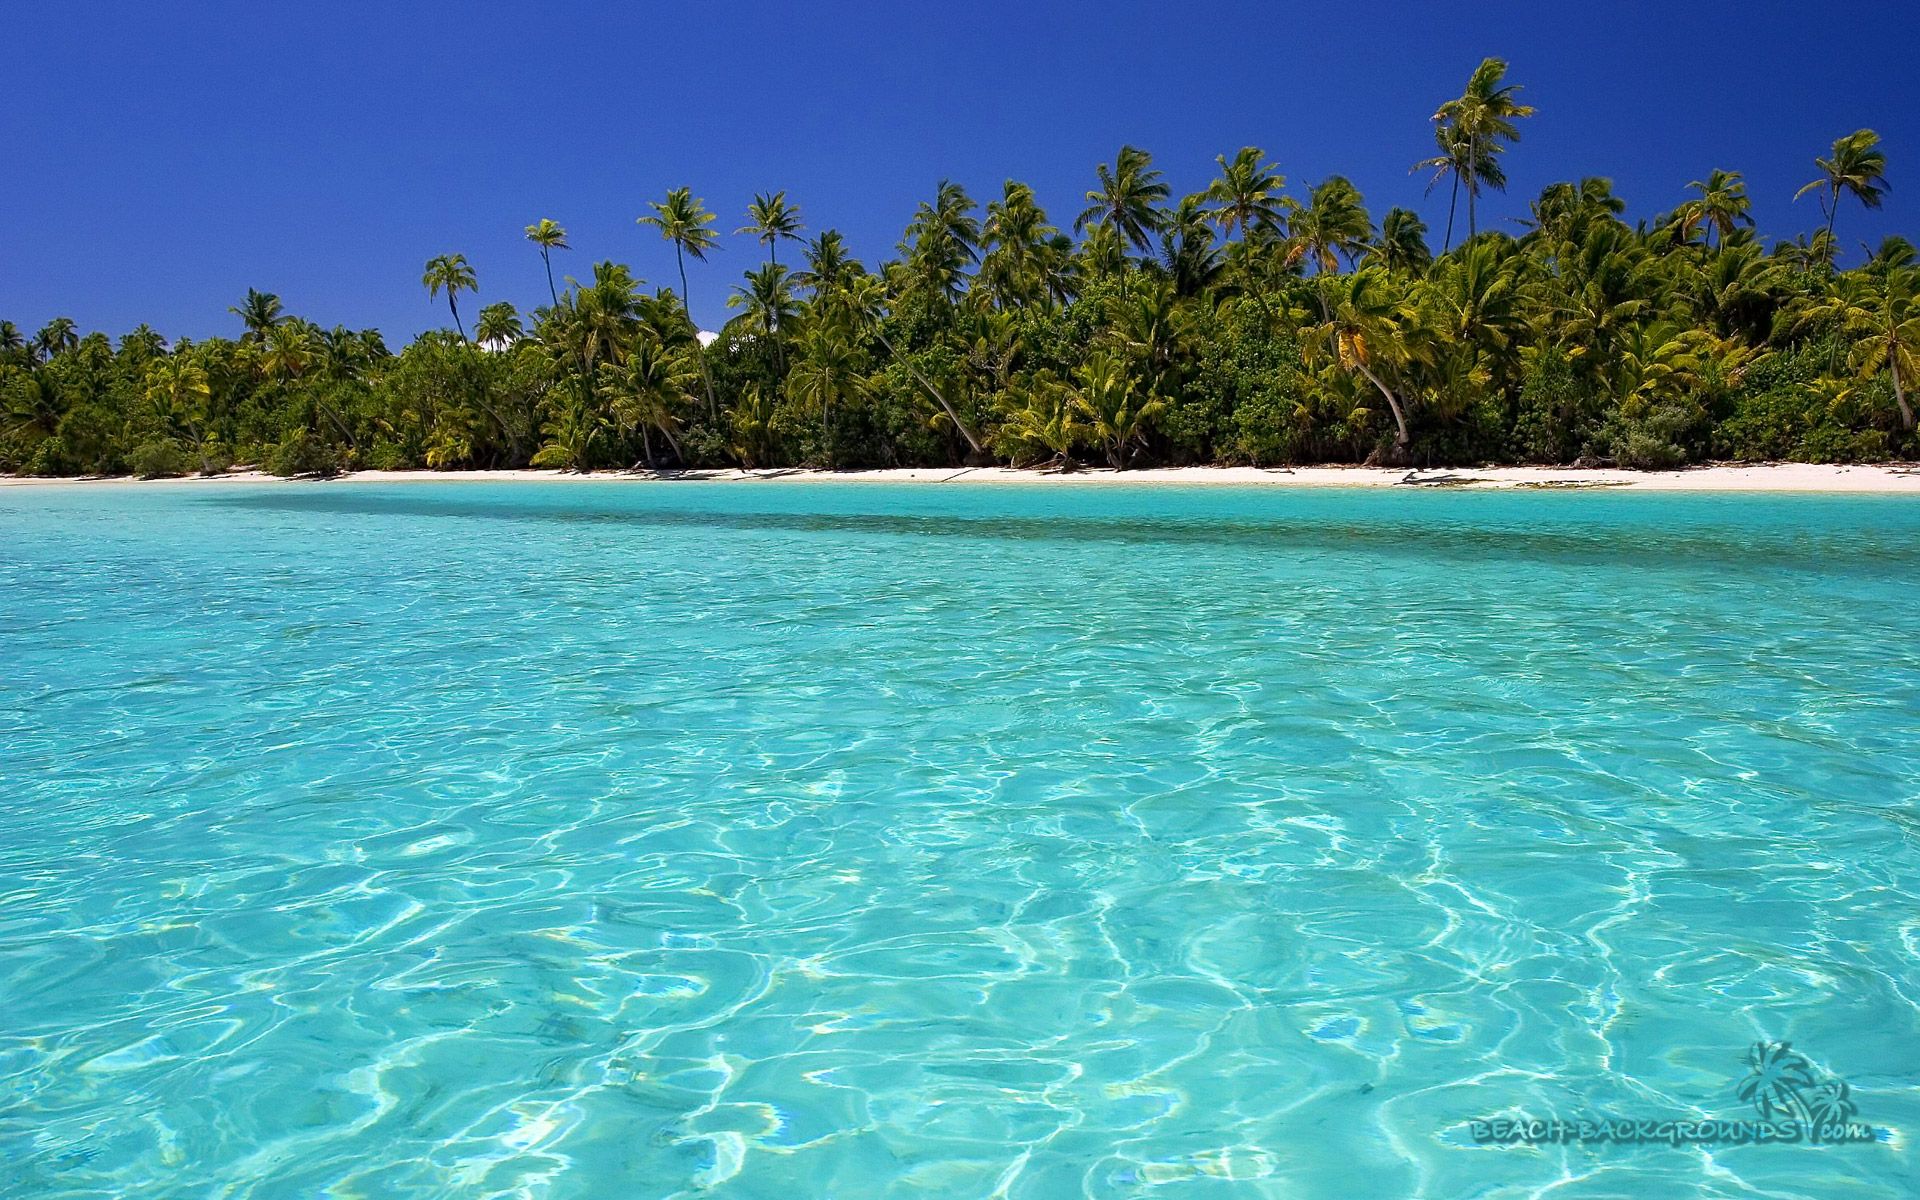 Can you say clear water??(: | Summmmmer | Pinterest | Tropical ...